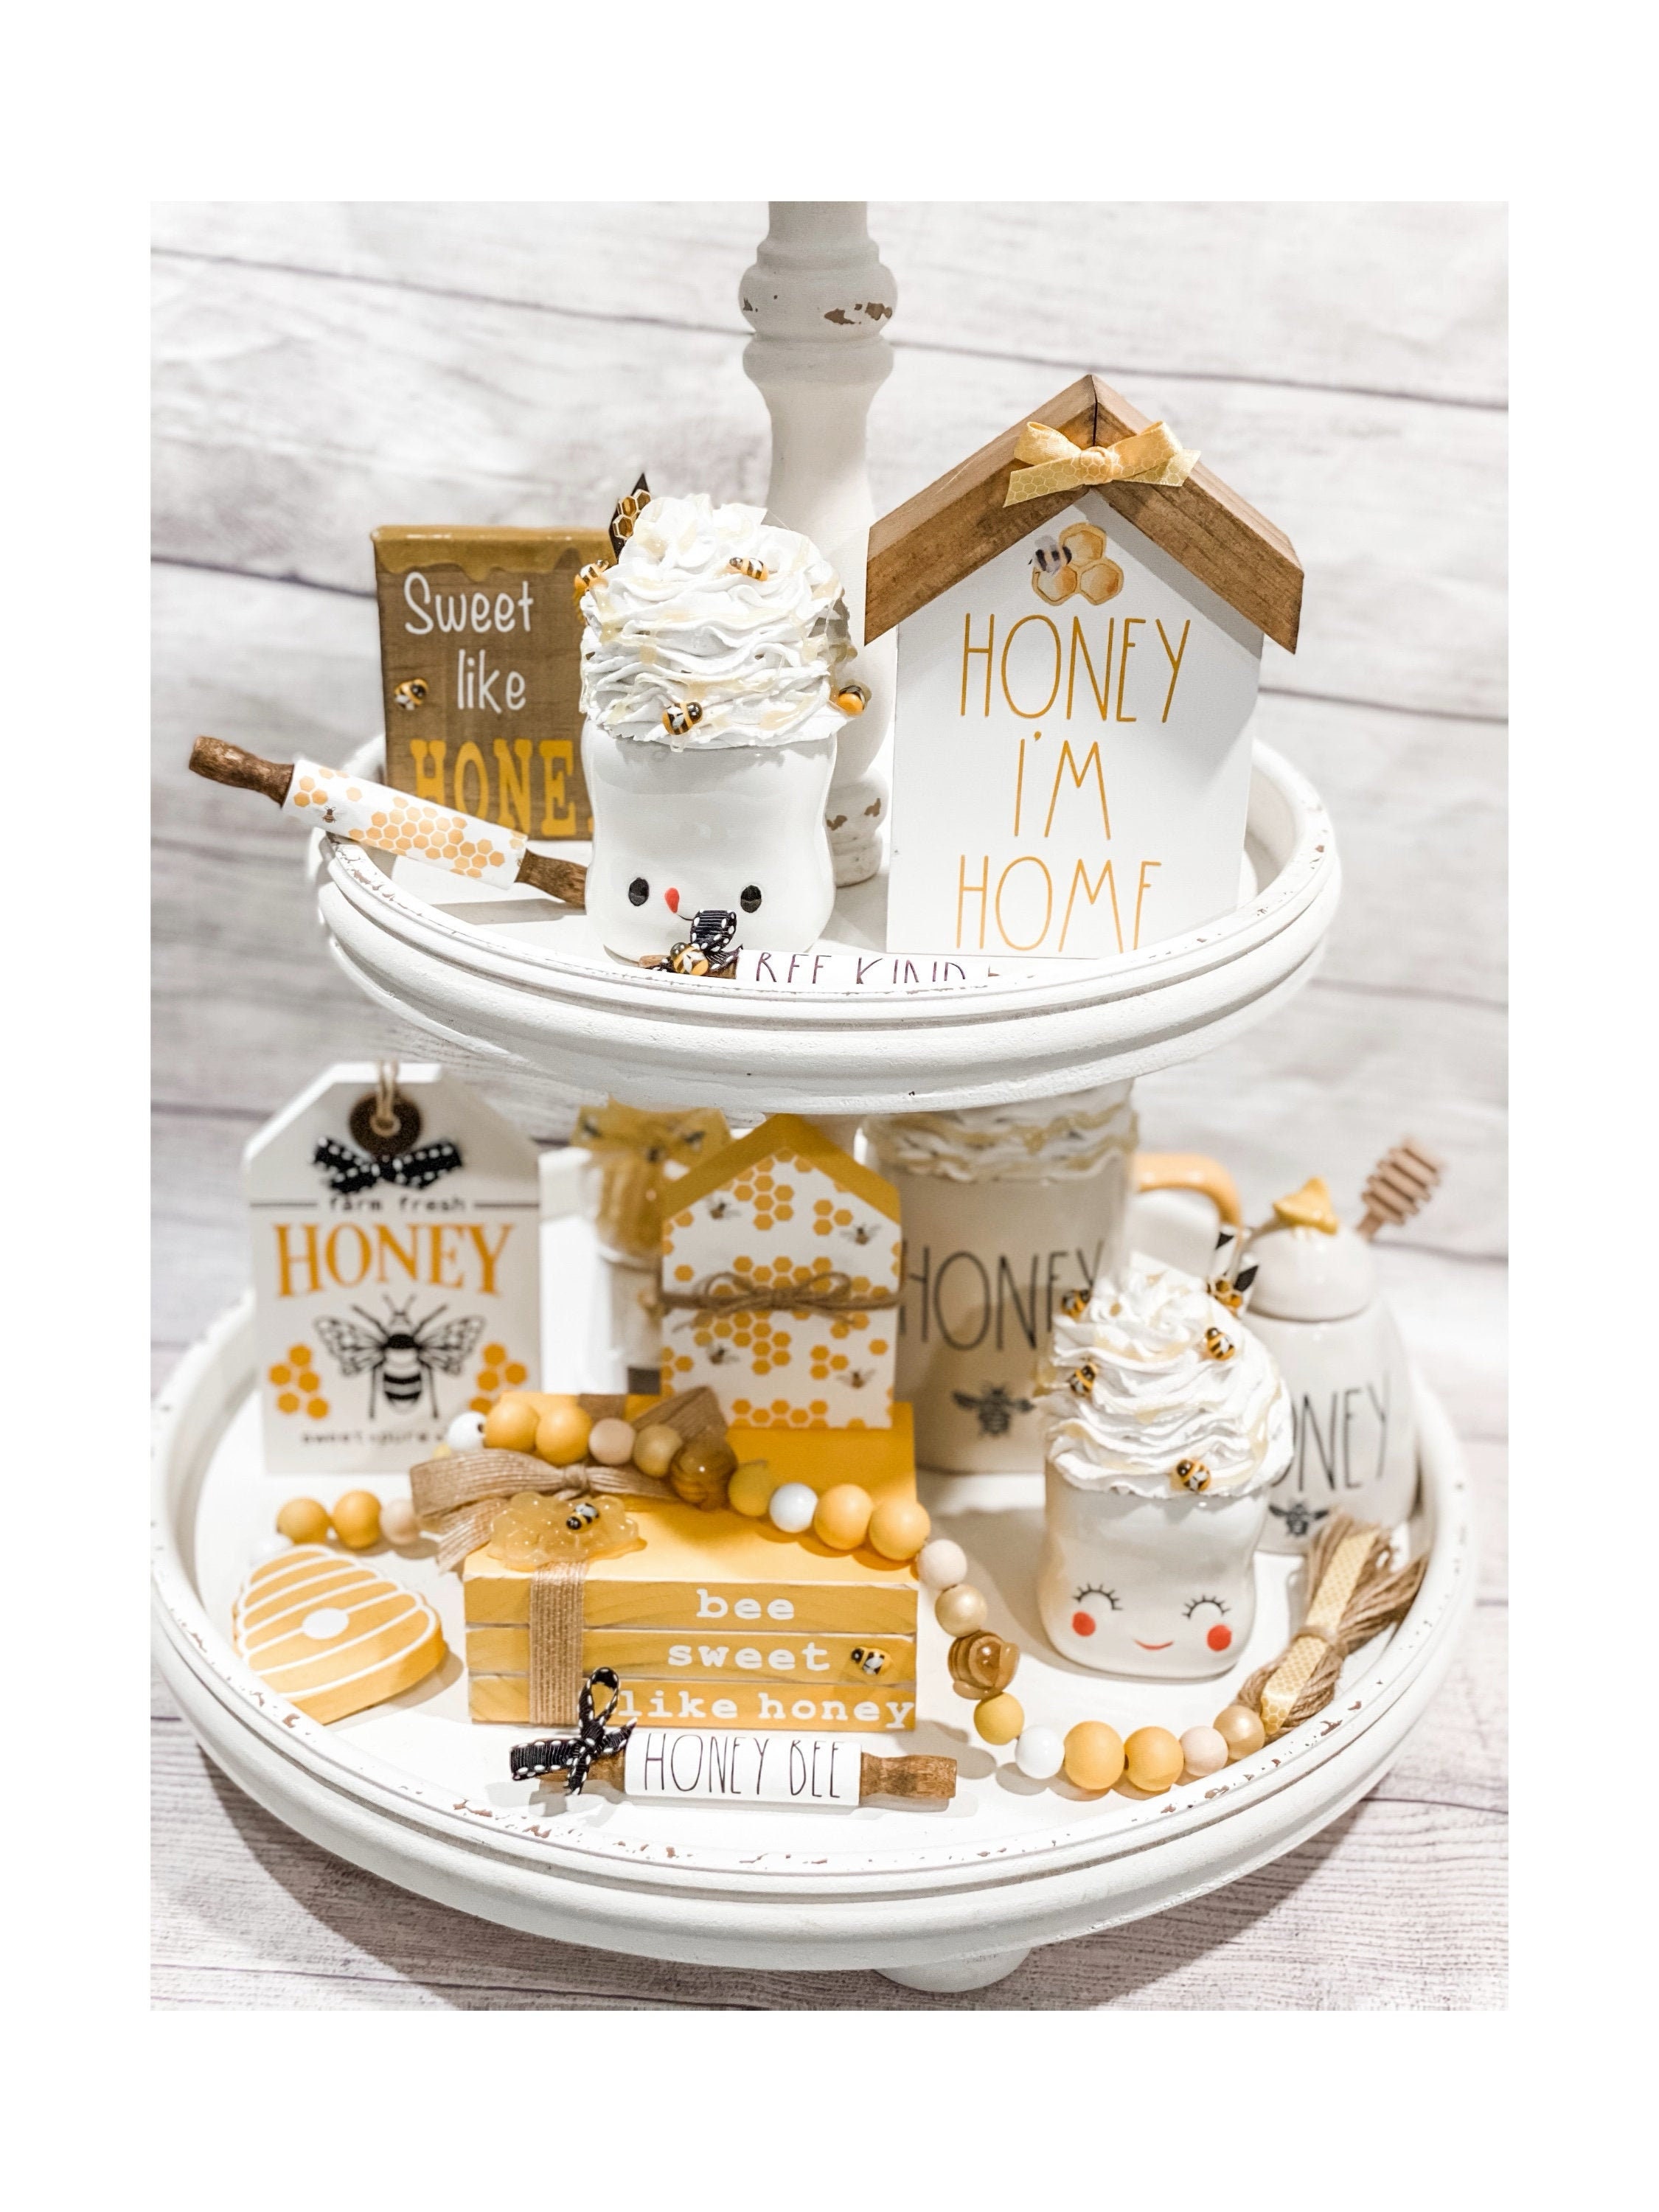 Bee Tiered Tray Decor with Wooden Fake Honey Hive Dippers Bumble Bee Gifts  for Women Decorations for Spring Summer Farmhouse Home Kitchen Shelf Rustic